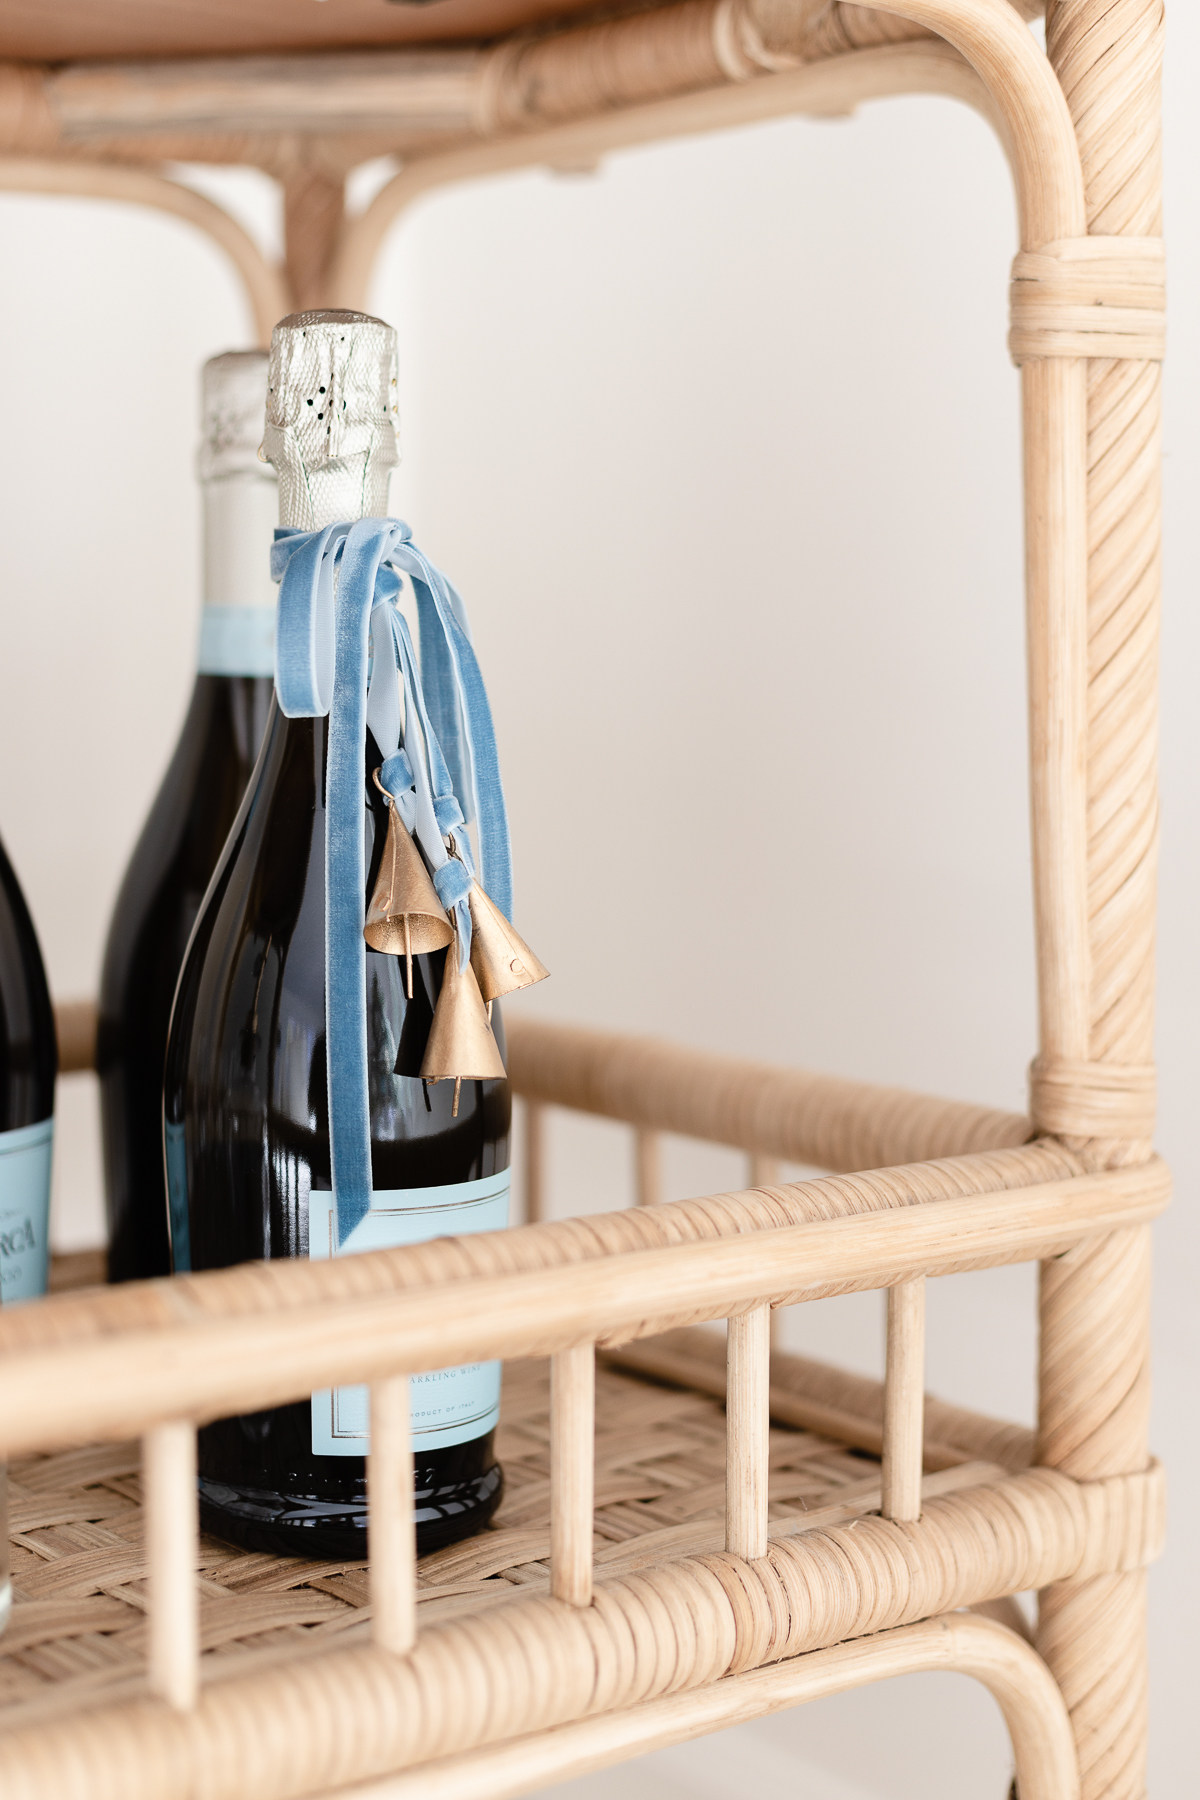 A bottle of champagne on a rattan bar cart styled for Christmas